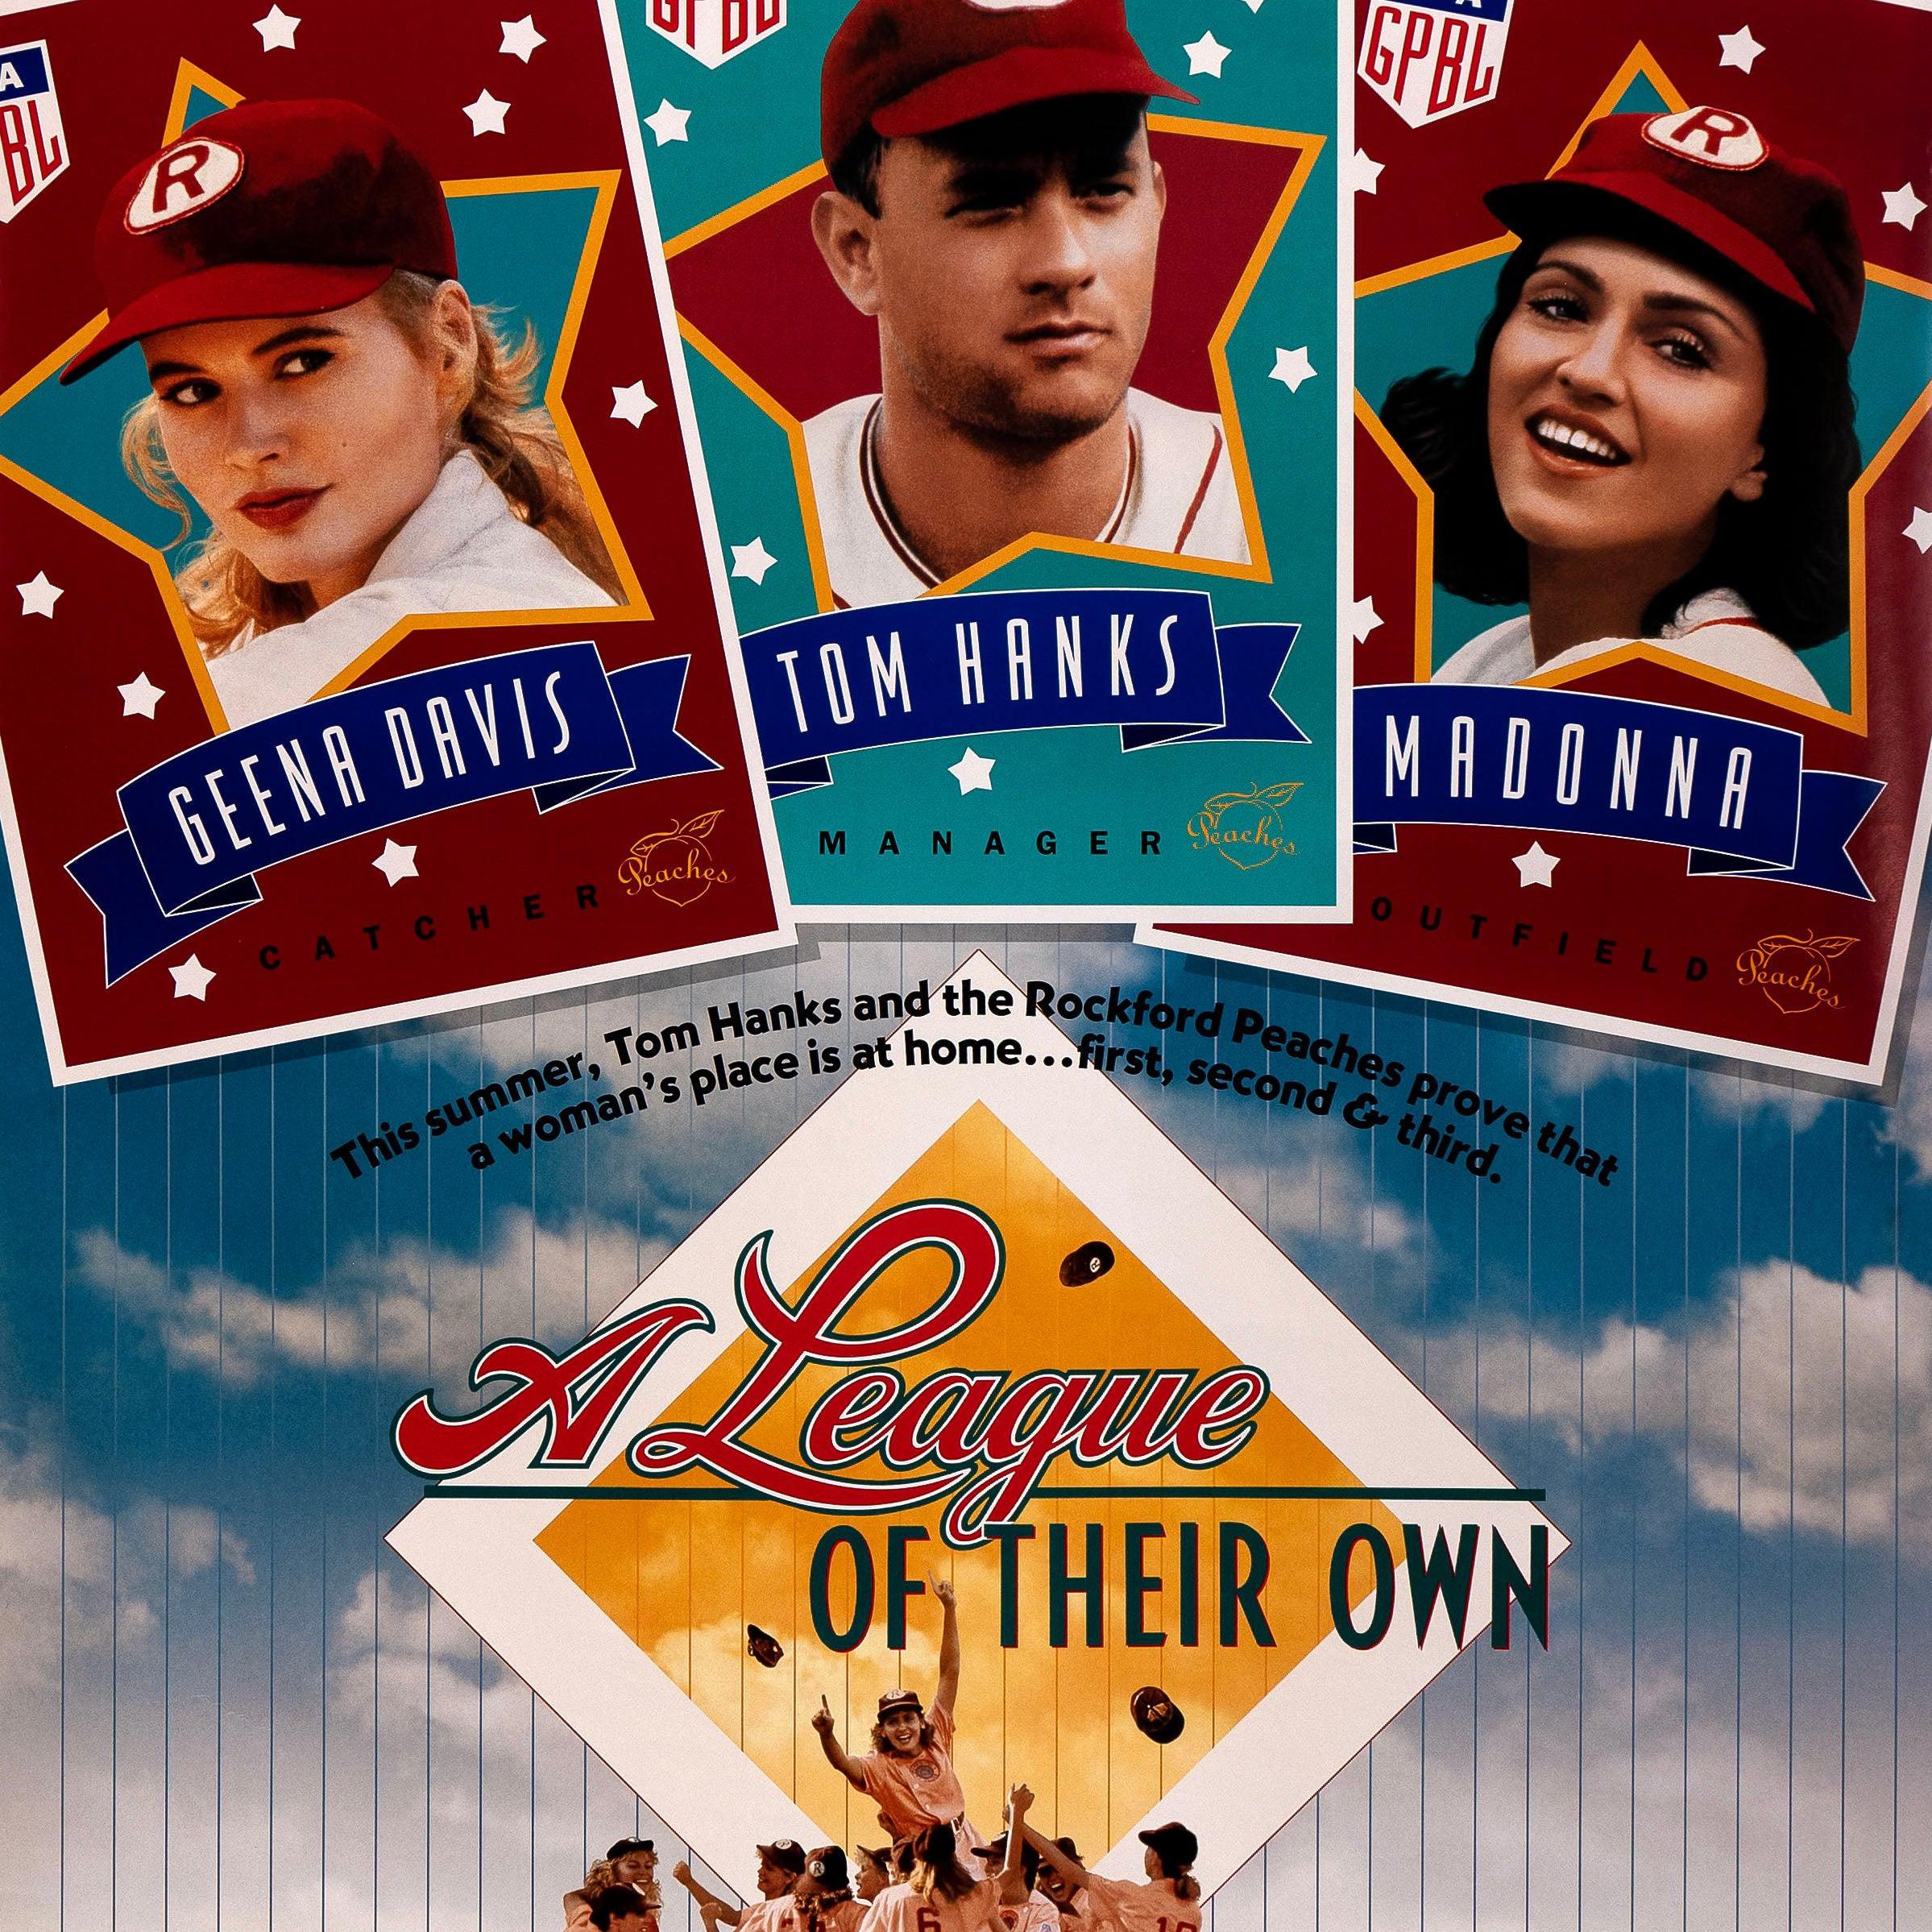 image of women in baseball uniforms on a baseball field with three baseball trading card s featuring the stars of the movie